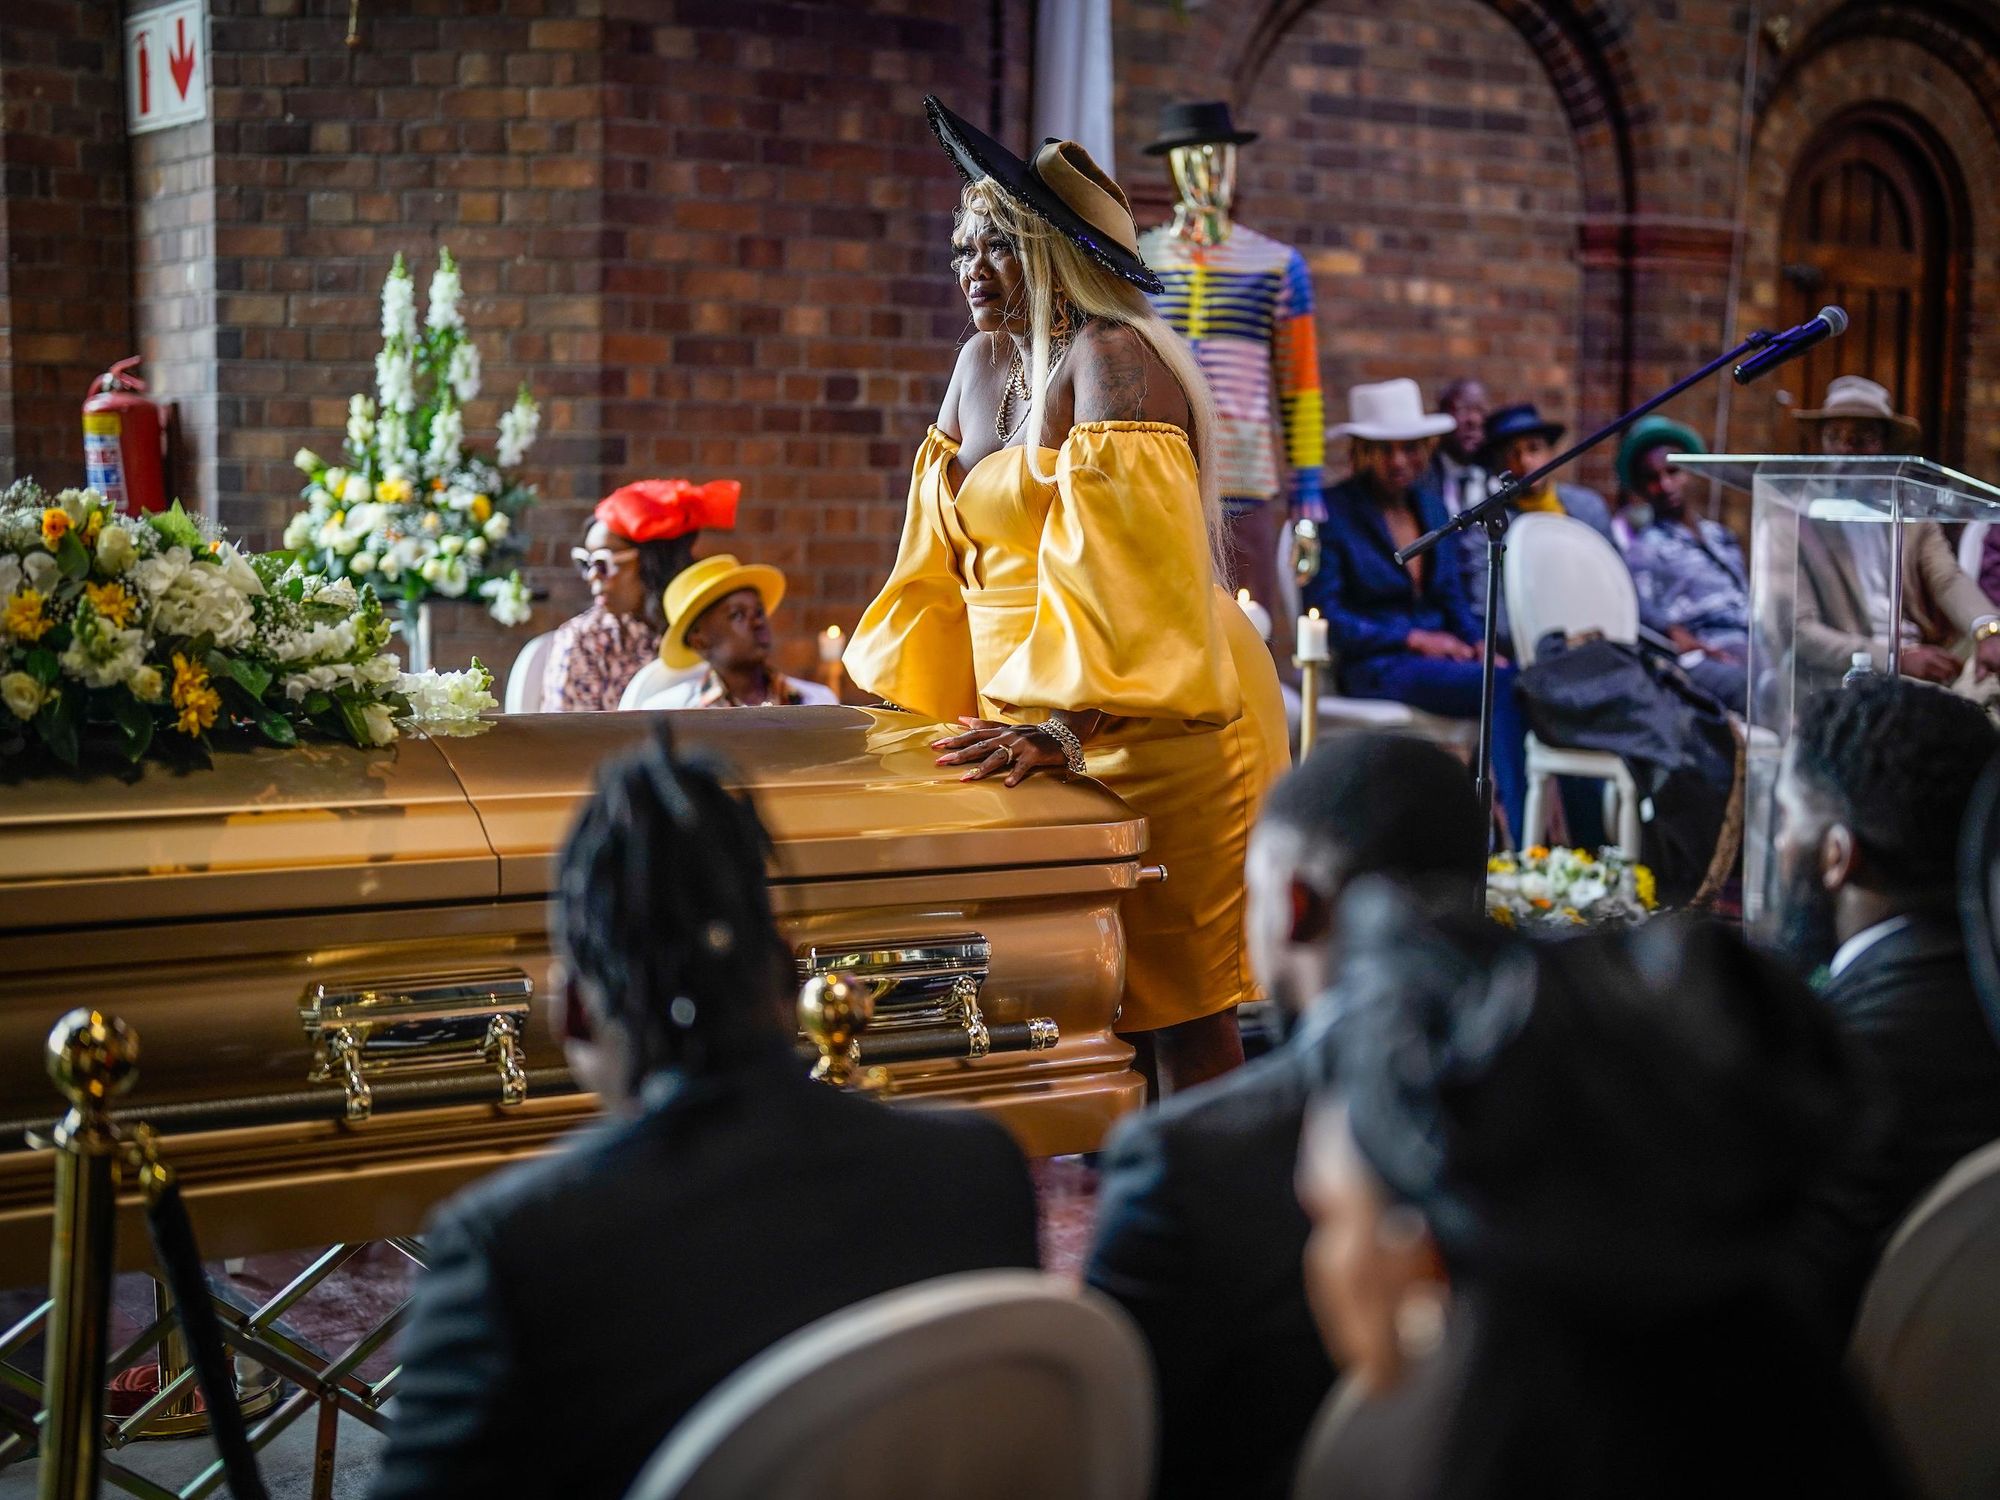 A still from the TV series, of a woman dressed in yellow standing at a coffin.